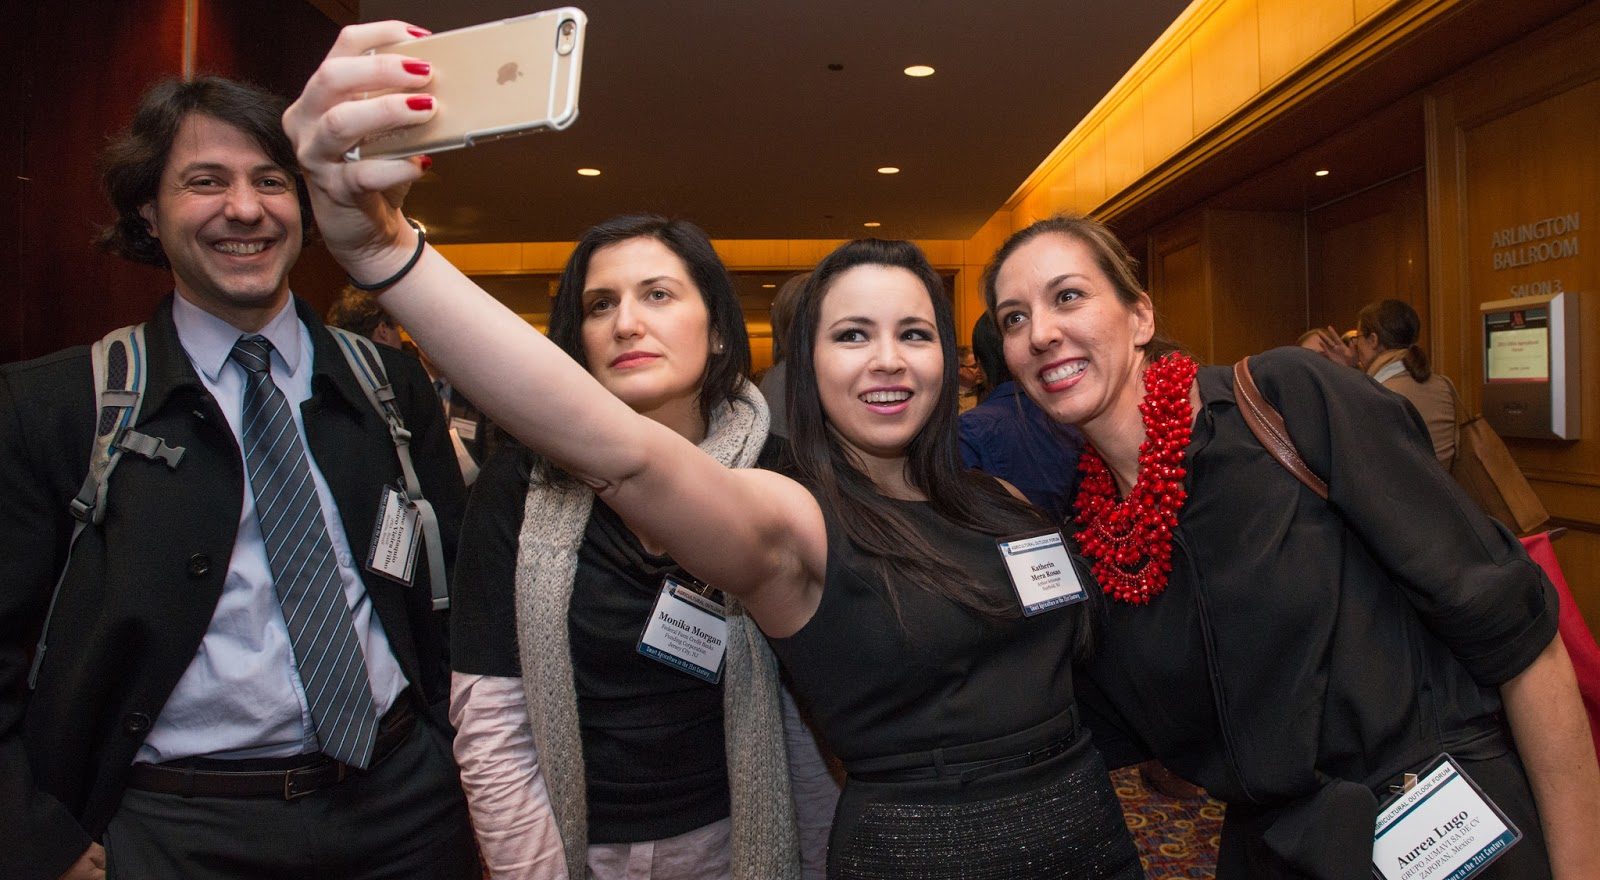 group selfie at a professional networking event